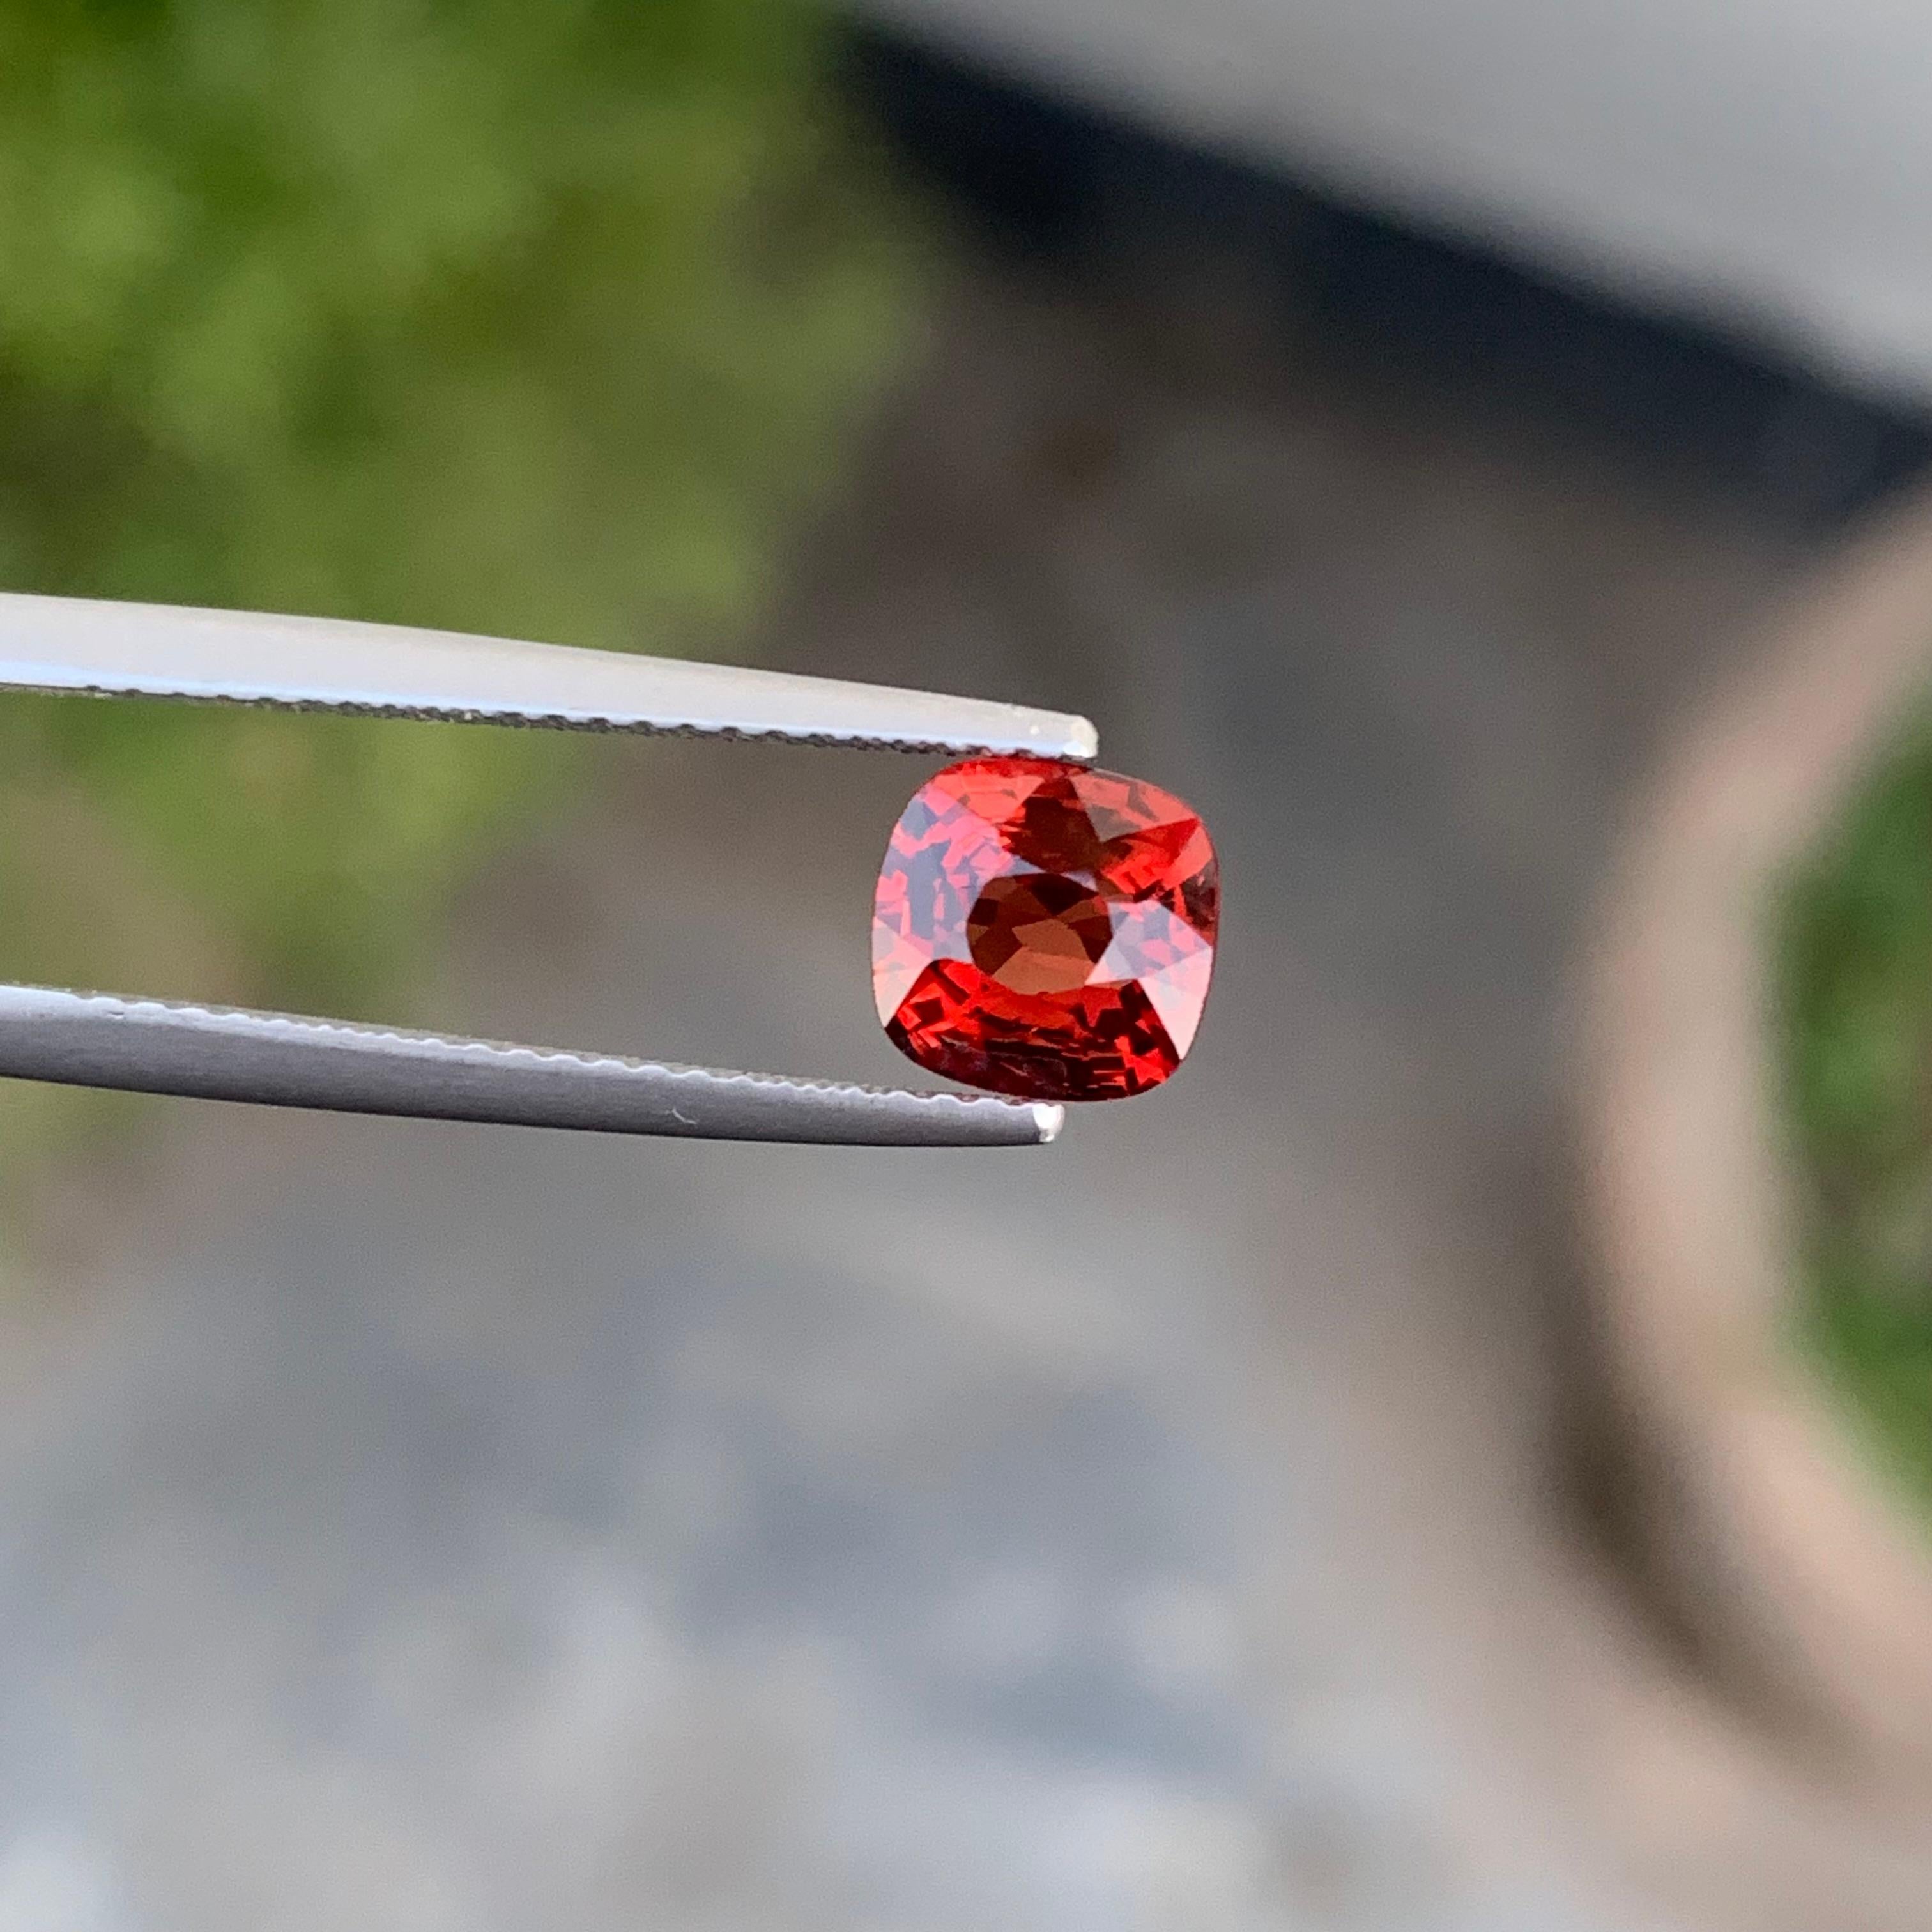 Charming 1.25 Carat Cushion Cut Loose Natural Red Spinel from Burma Myanmar For Sale 2